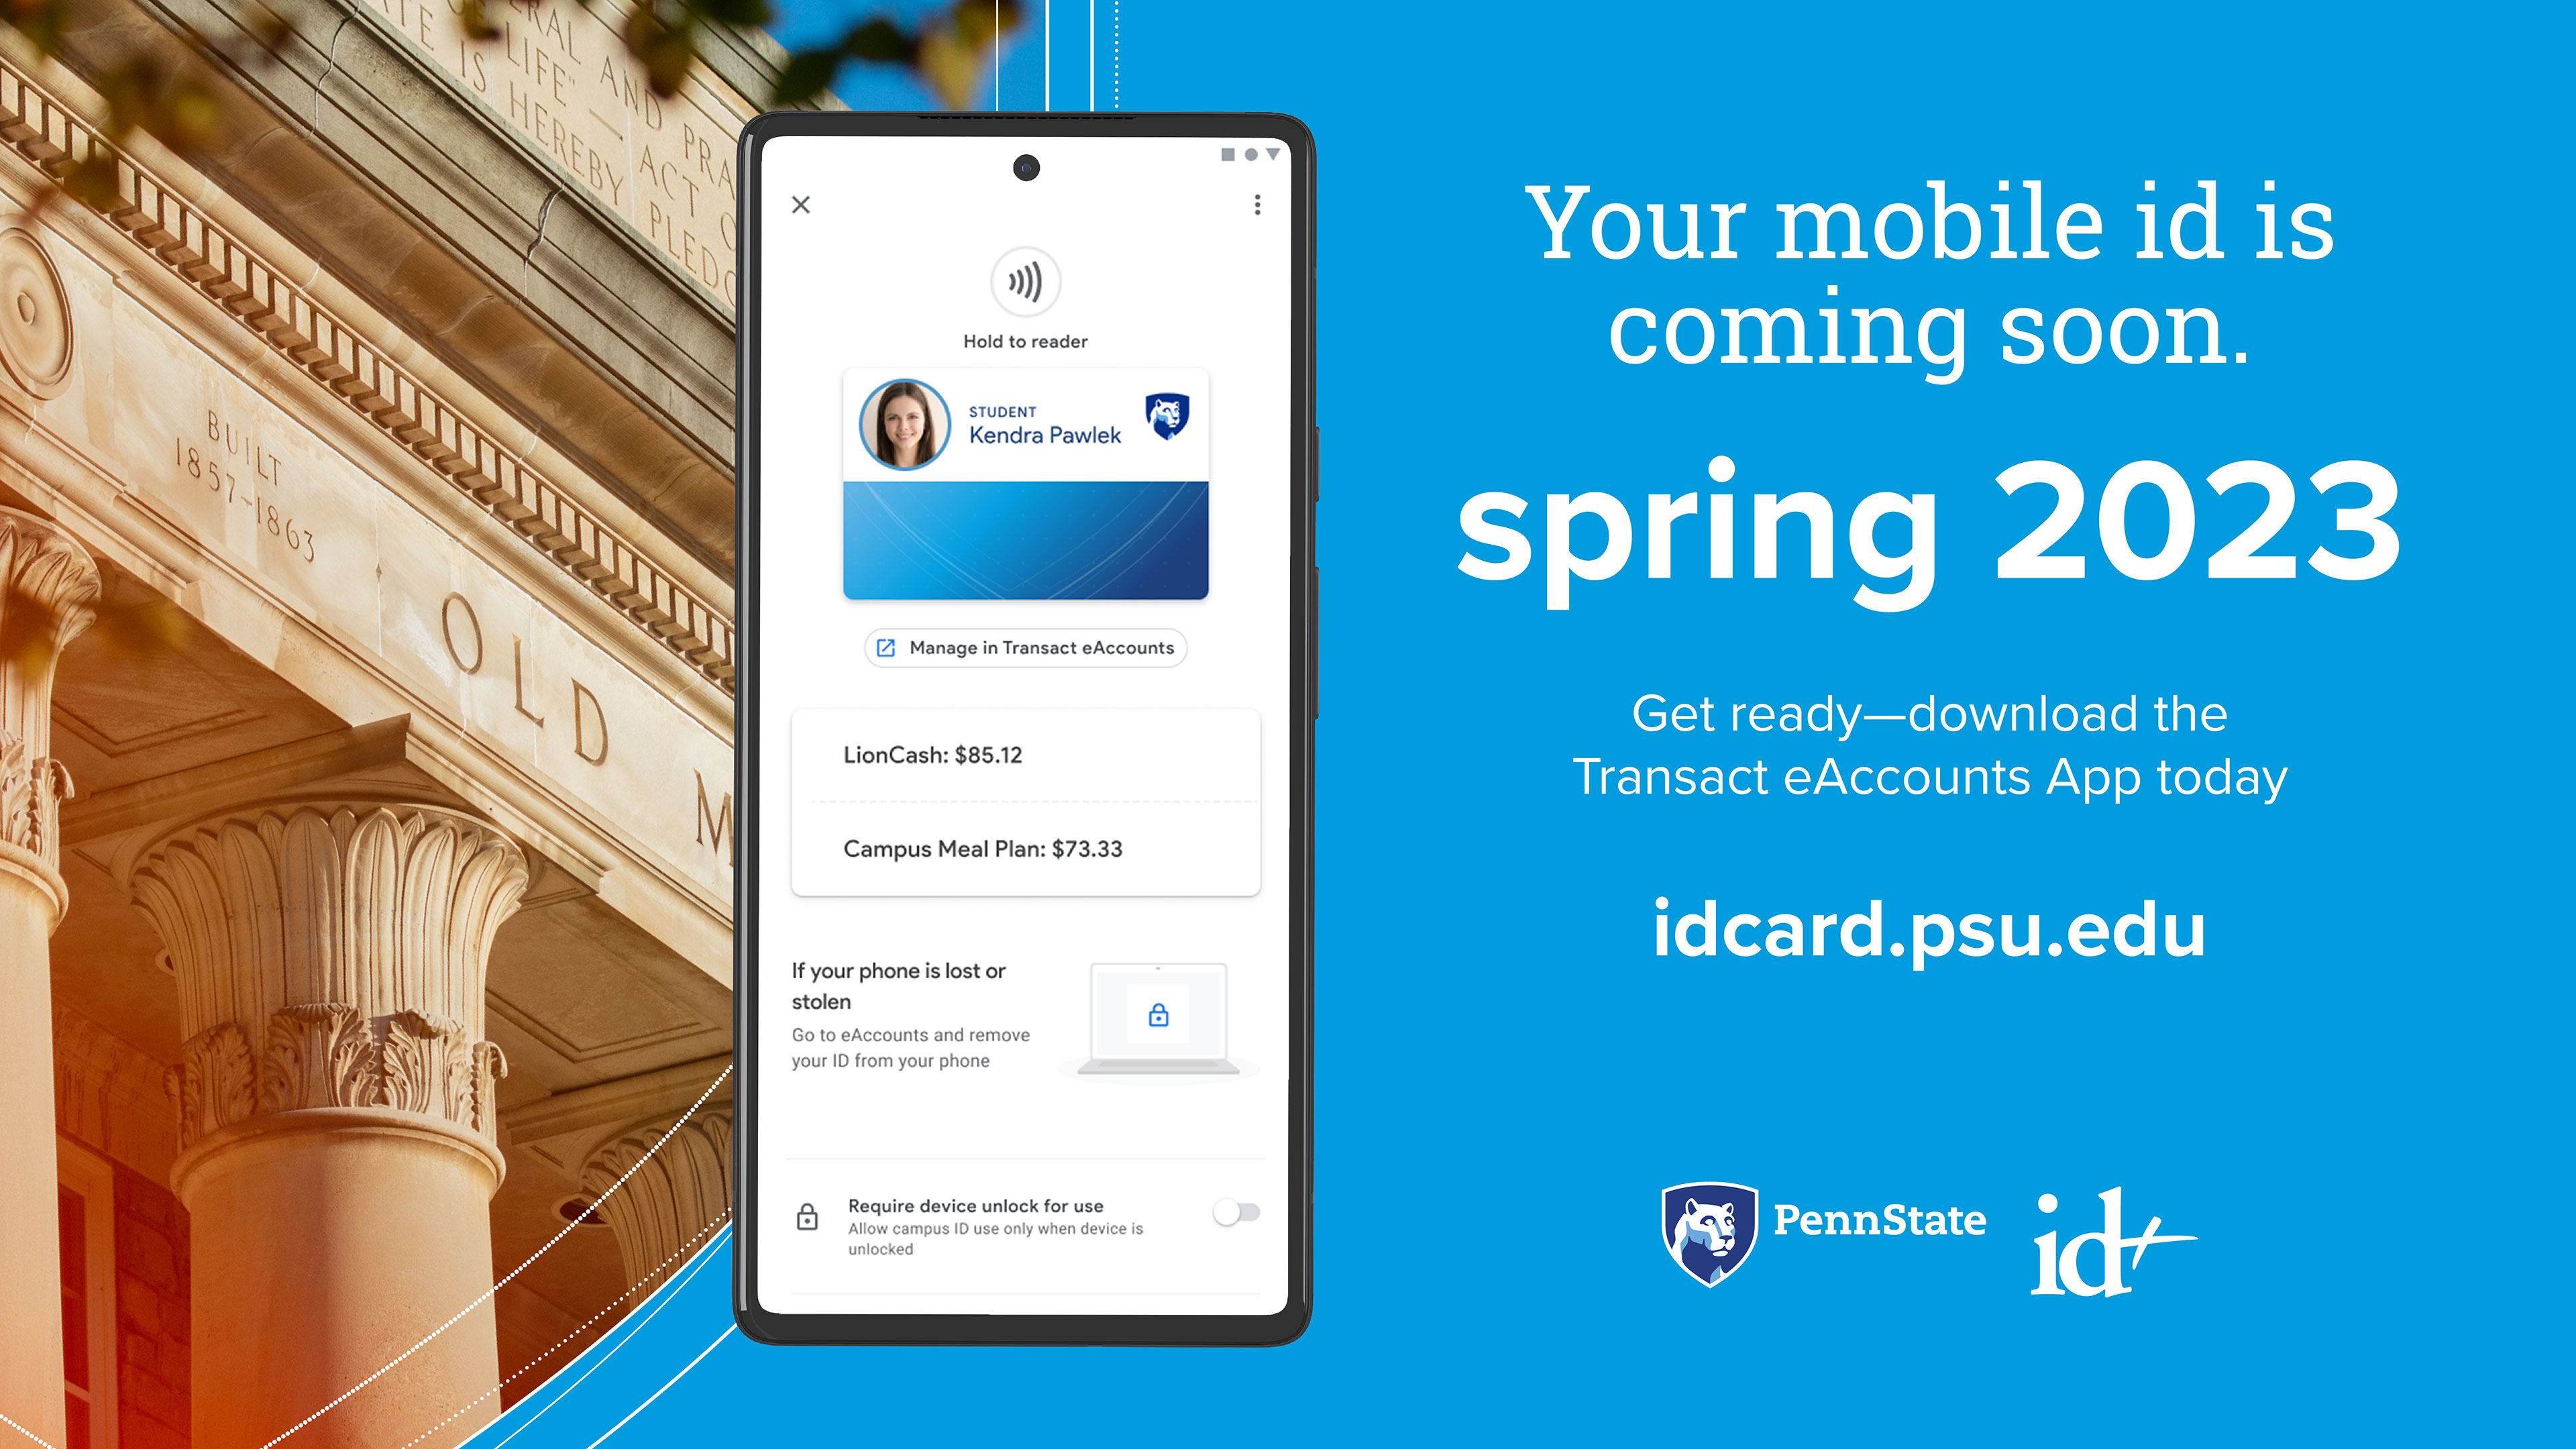 Your mobile ID is coming soon. Get ready - download the Transact eAccounts app today and visit idcard.psu.edu